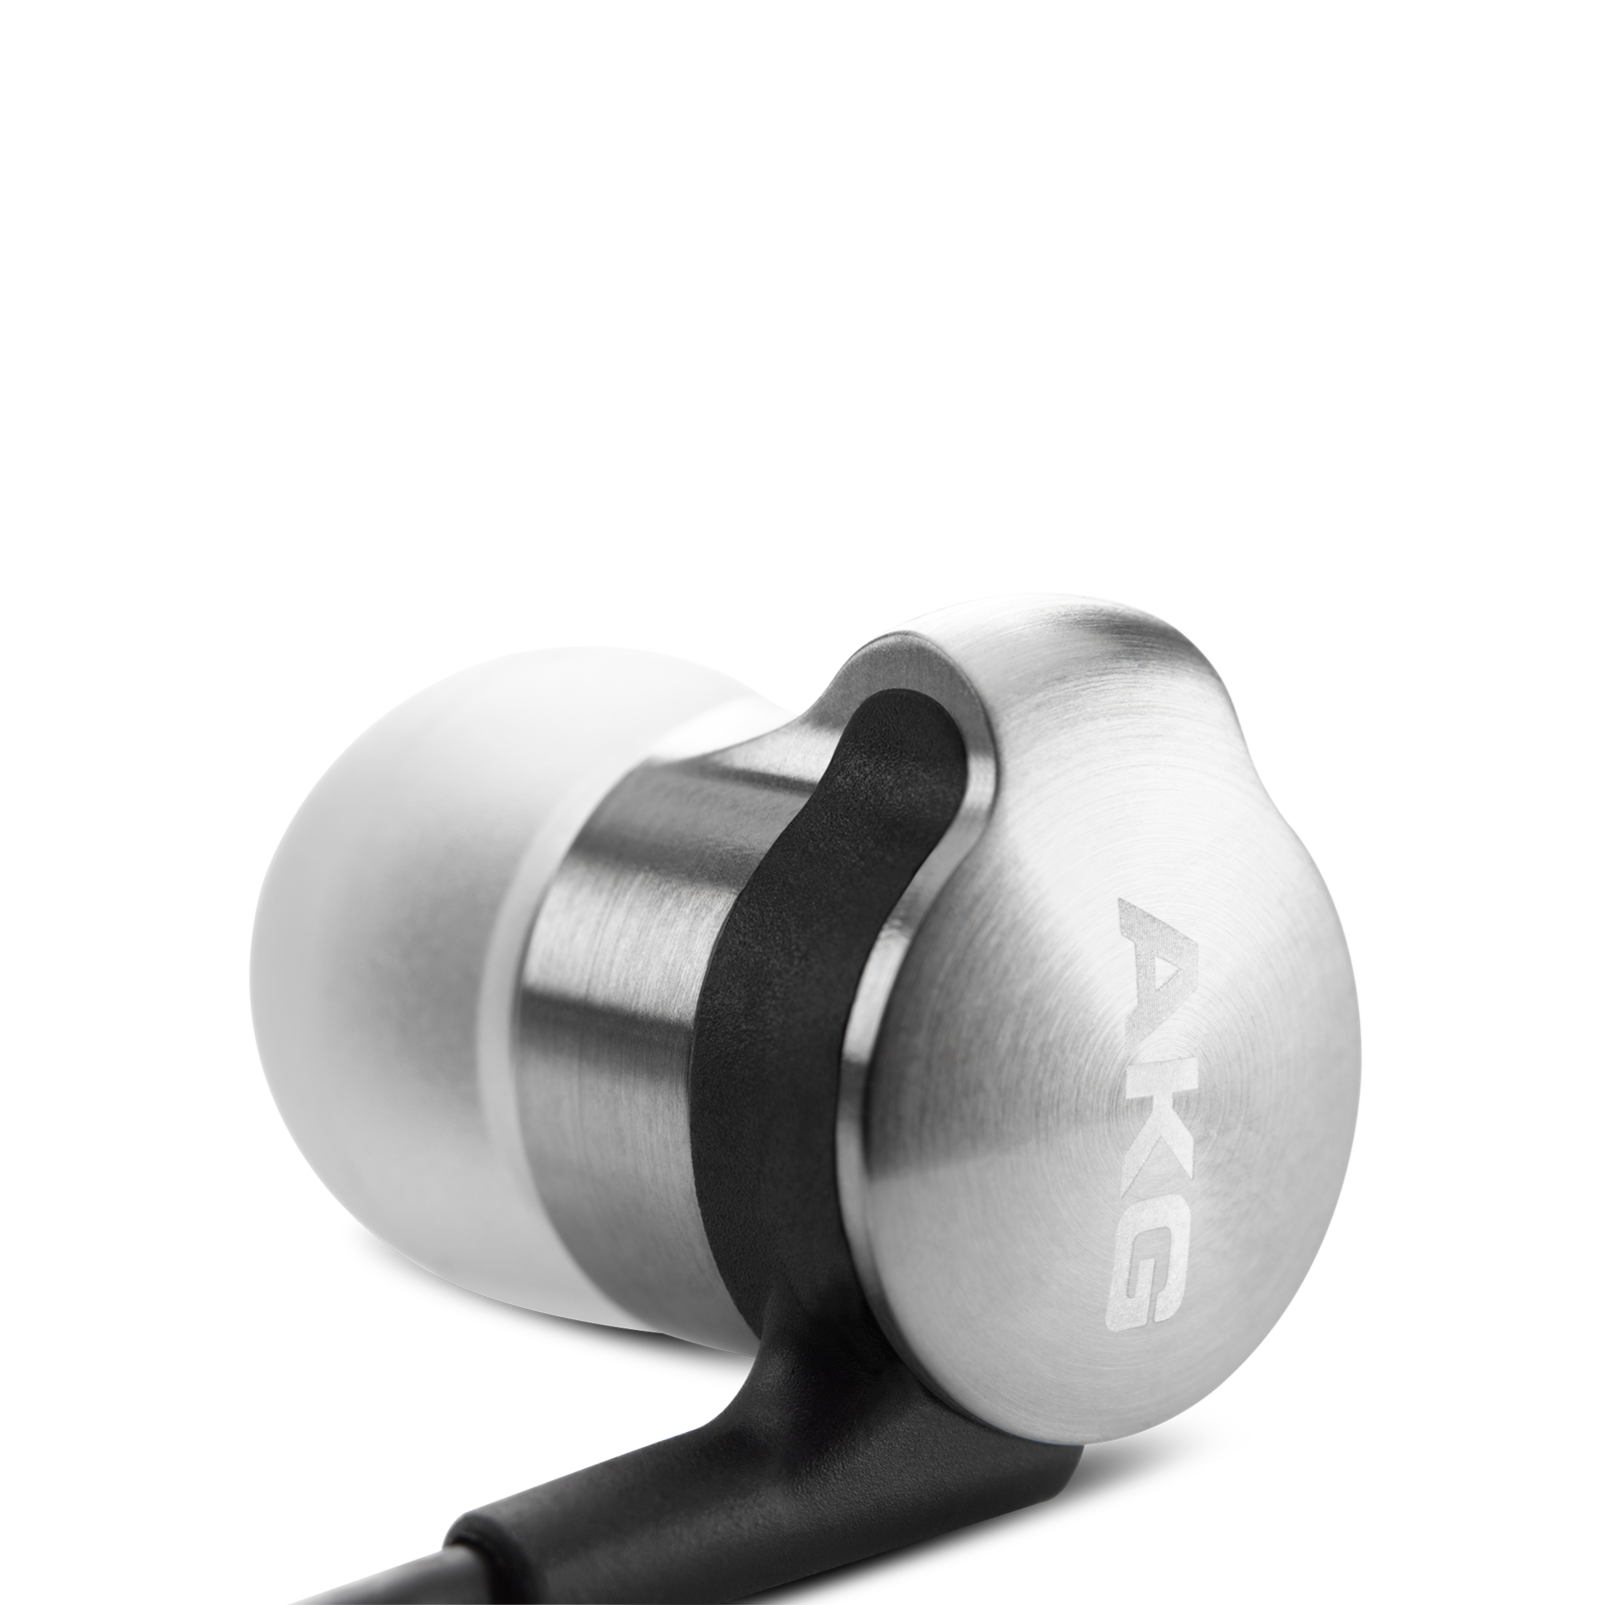 K3003i - Aluminum - Reference class 3-way earphones with integrated microphone and remote. - Detailshot 4